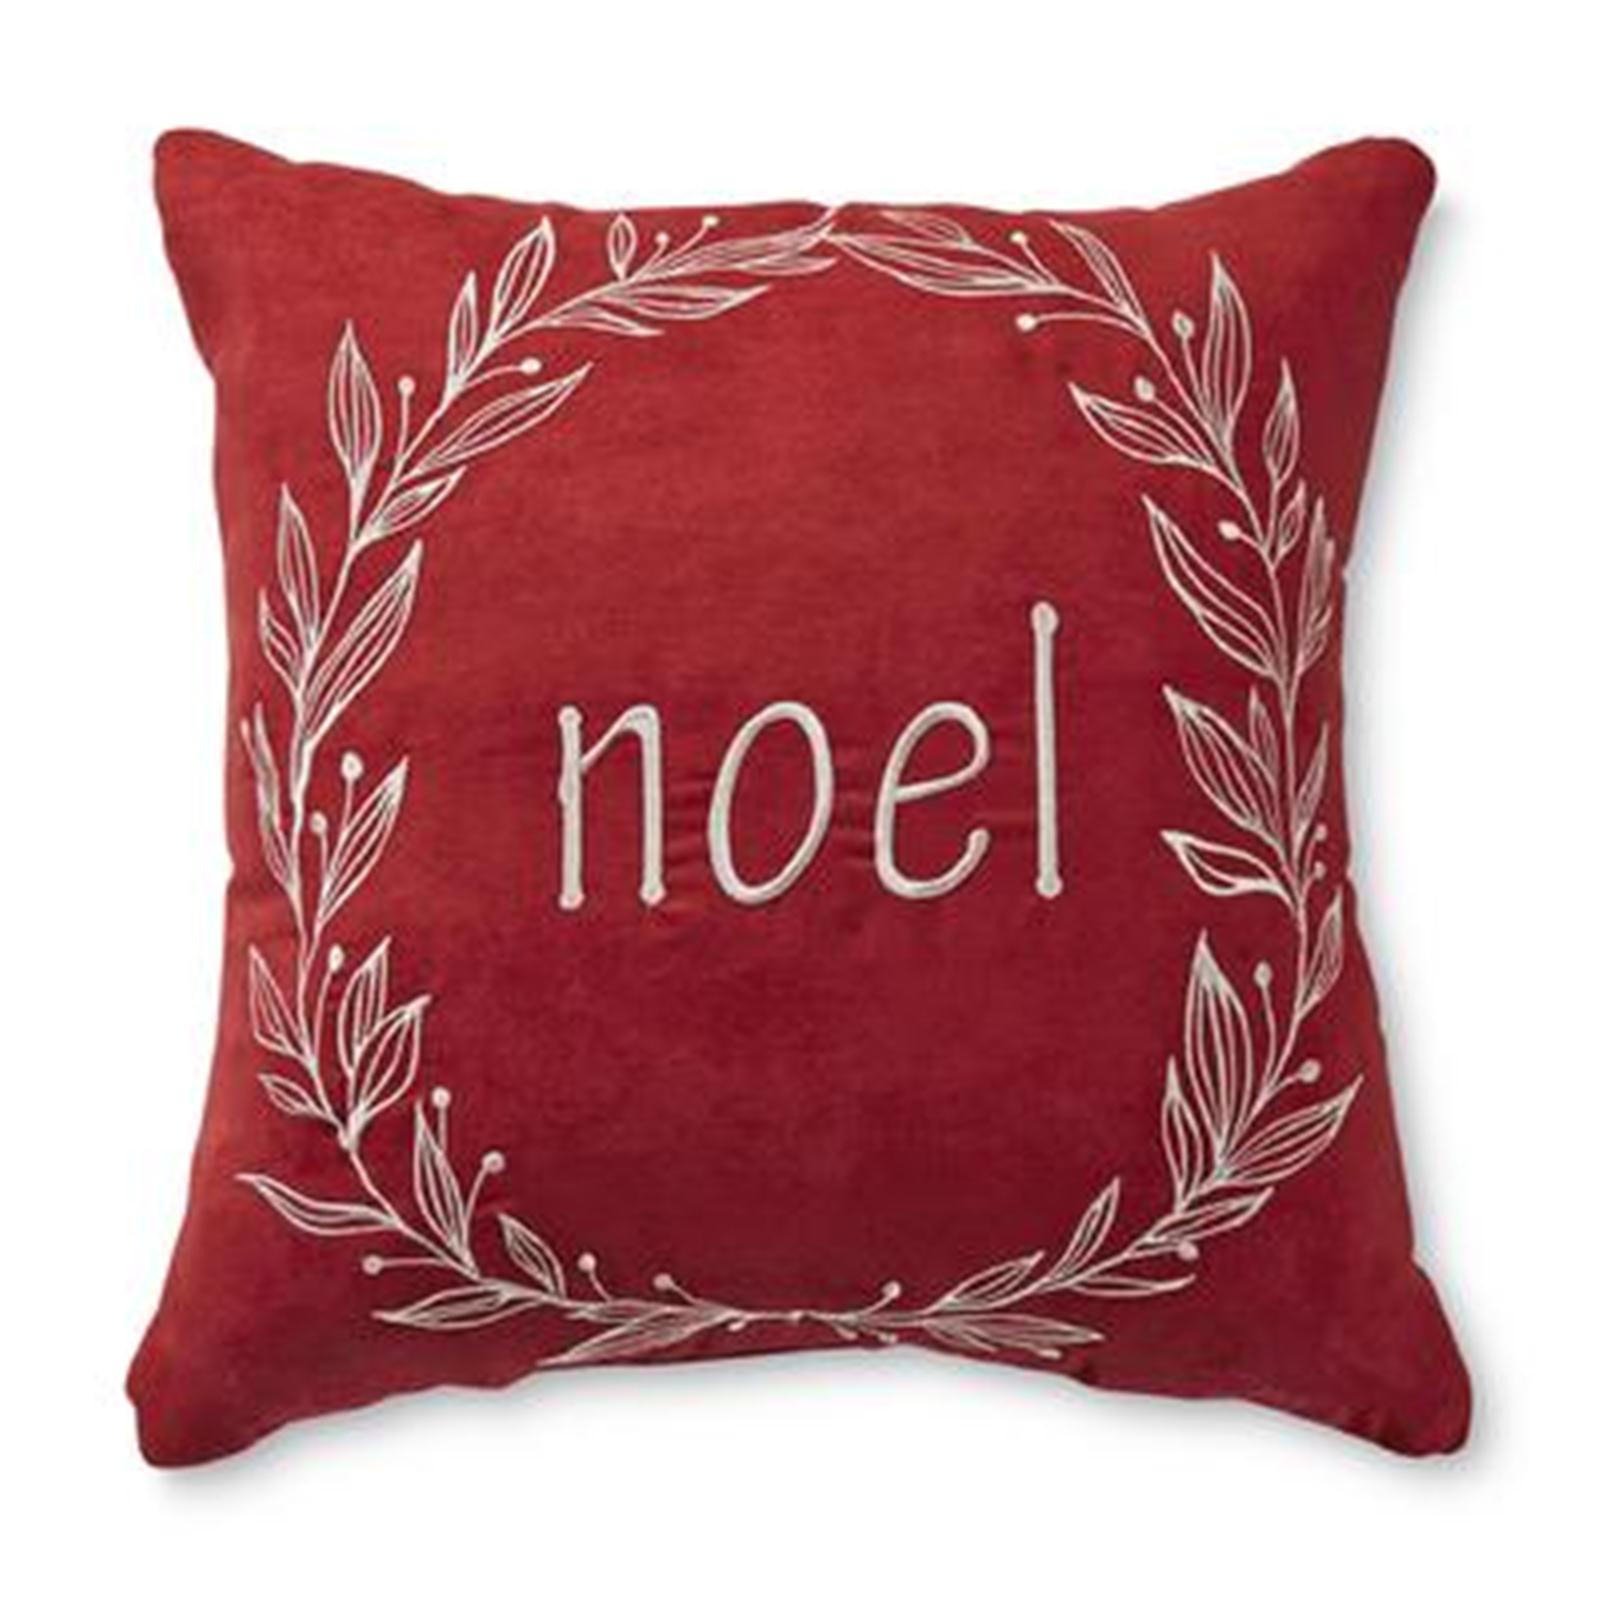 Cannon Microsuede Noel Holiday Pillow